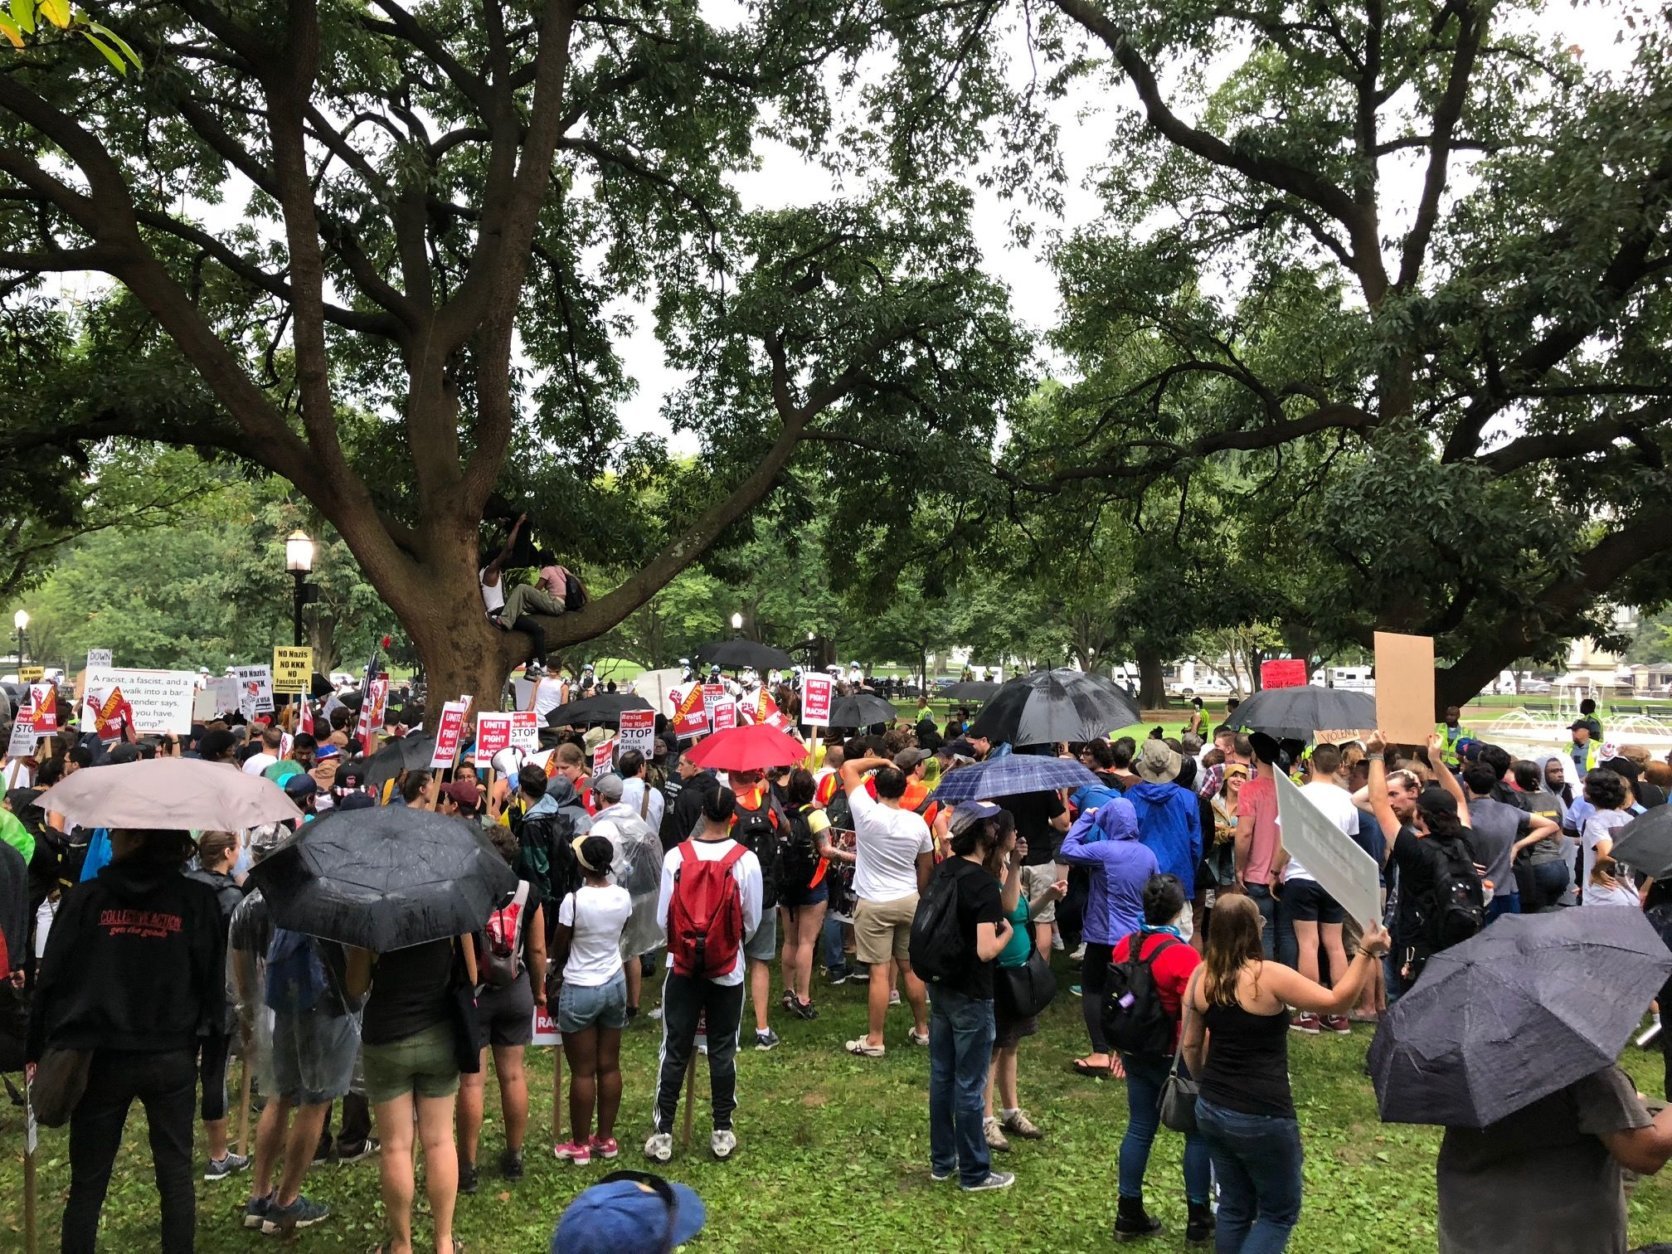 Protesters gather in front at the White House after a white nationalist rally in D.C. on Sunday, Aug. 13, 2018. (WTOP/Keara Dowd)